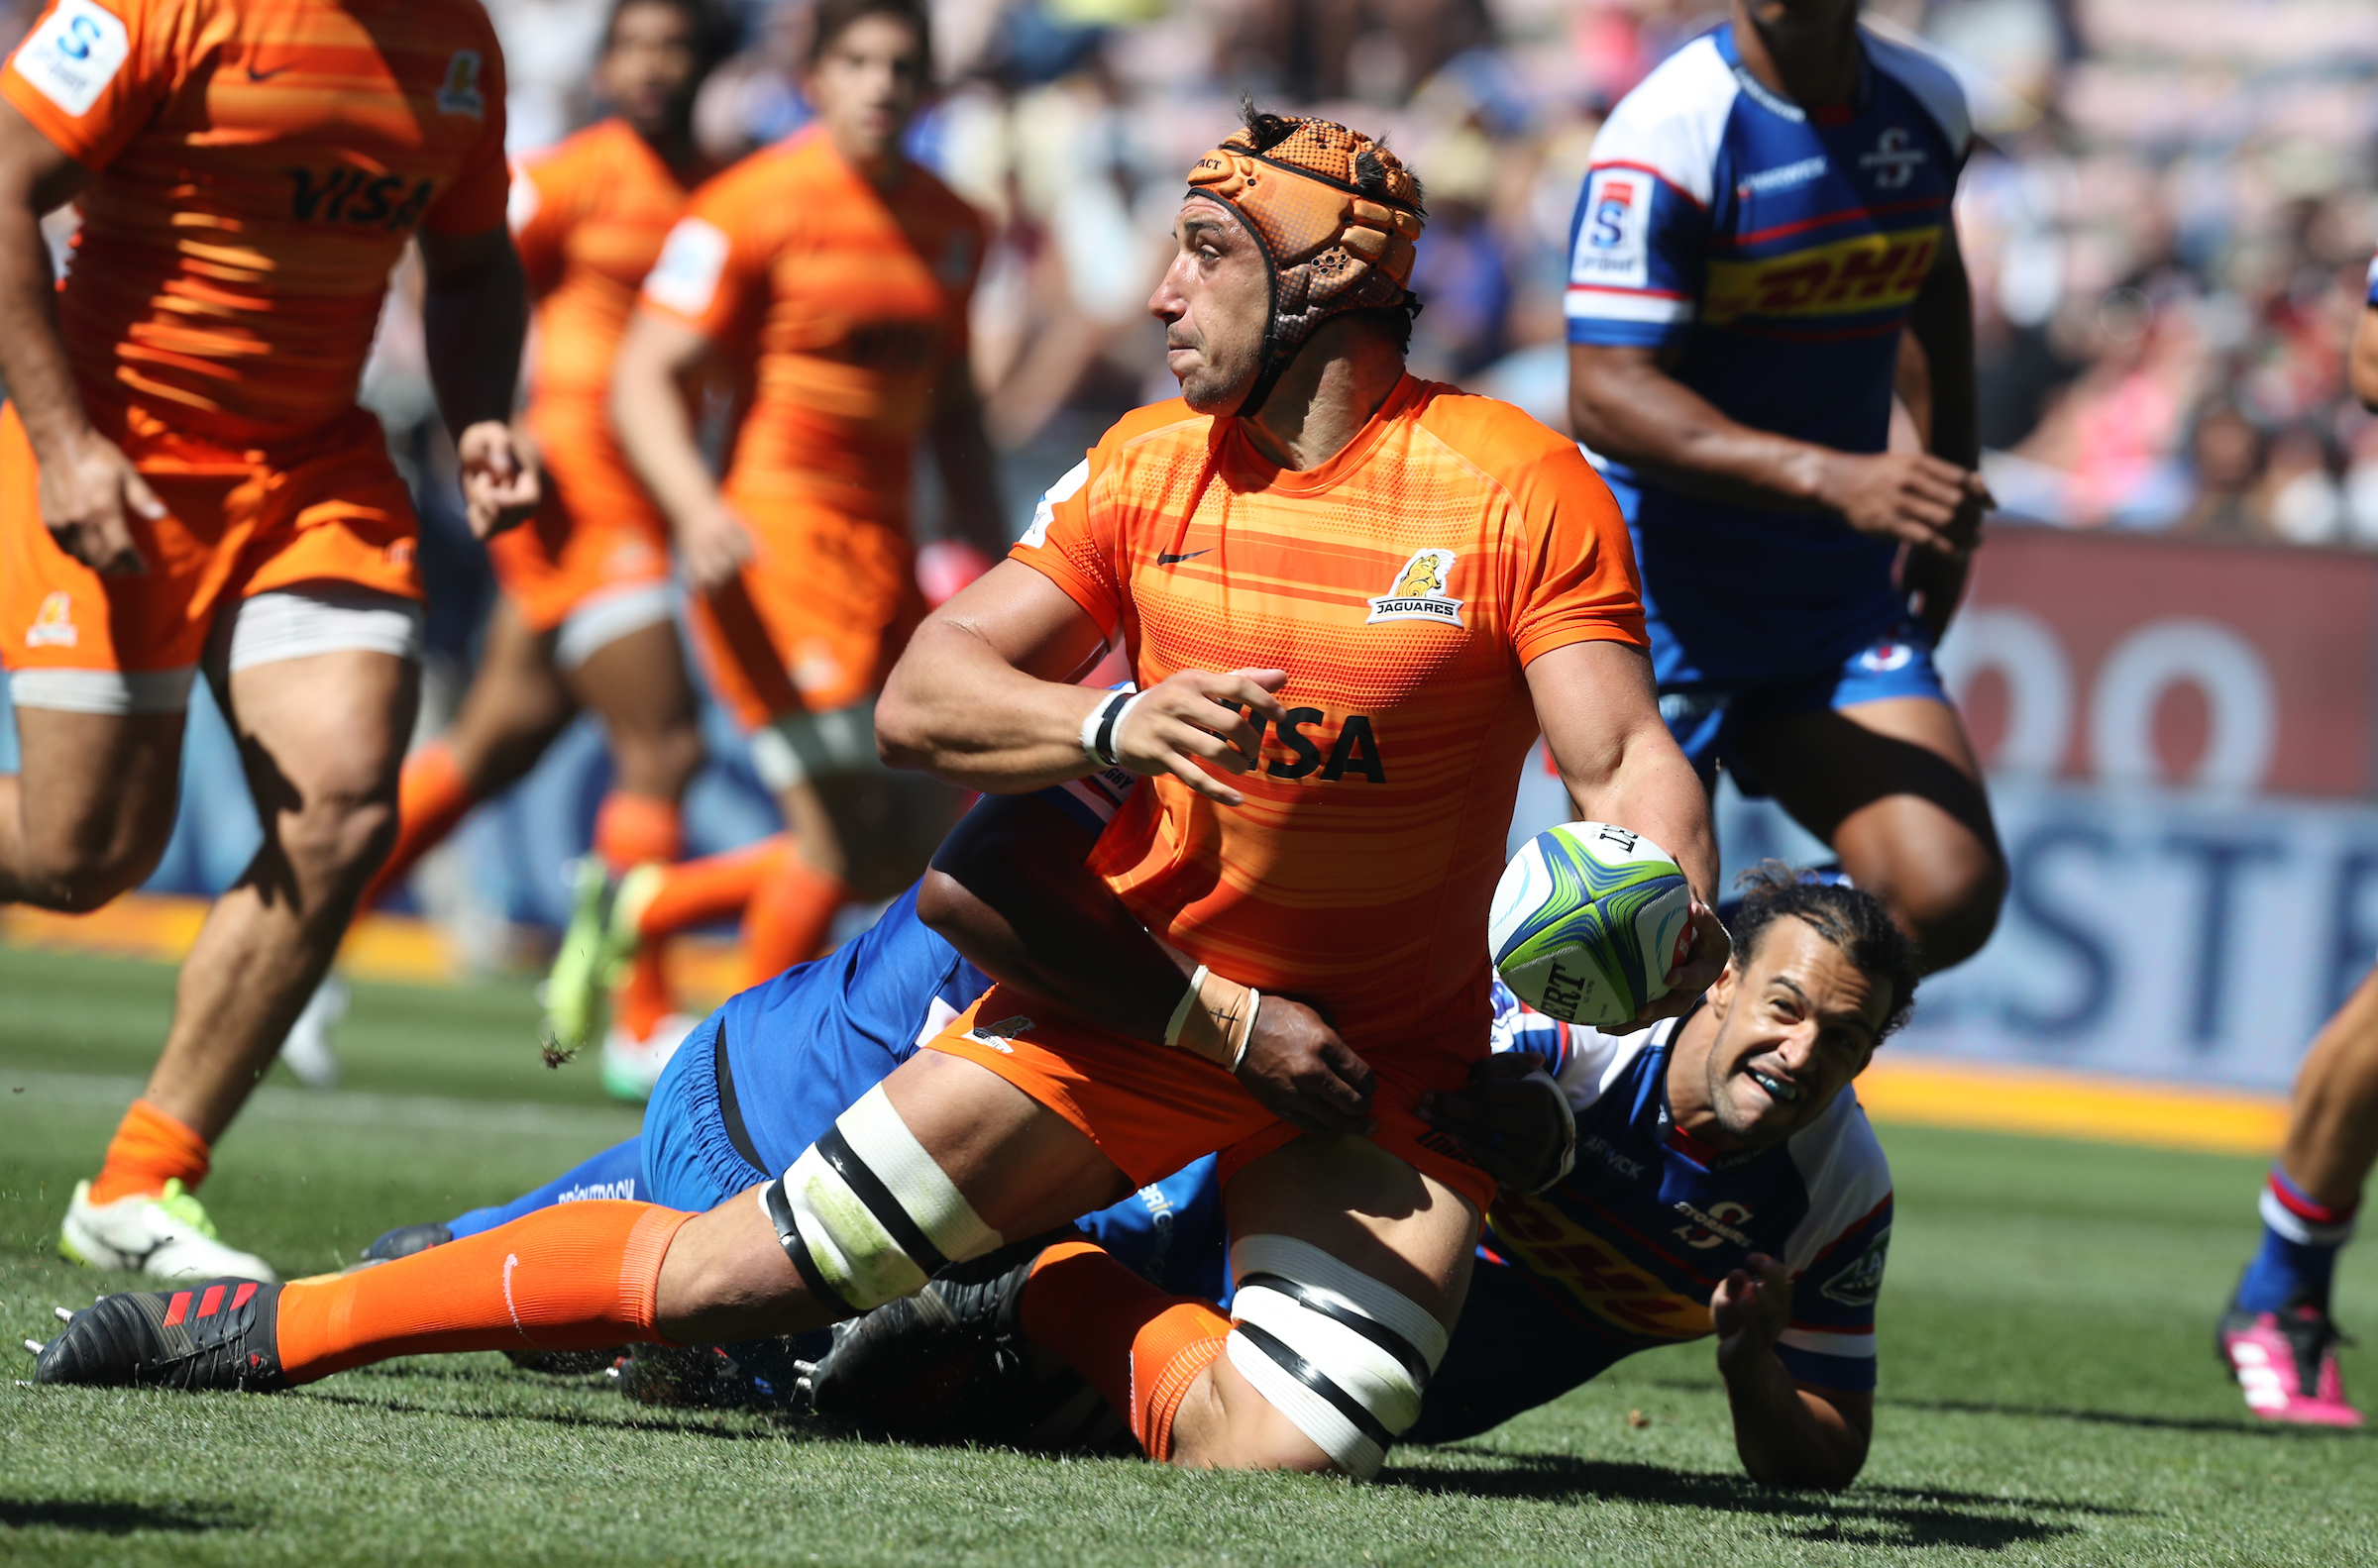 Super Rugby match between the DHL Stormers and the Jaguares - Jaguares